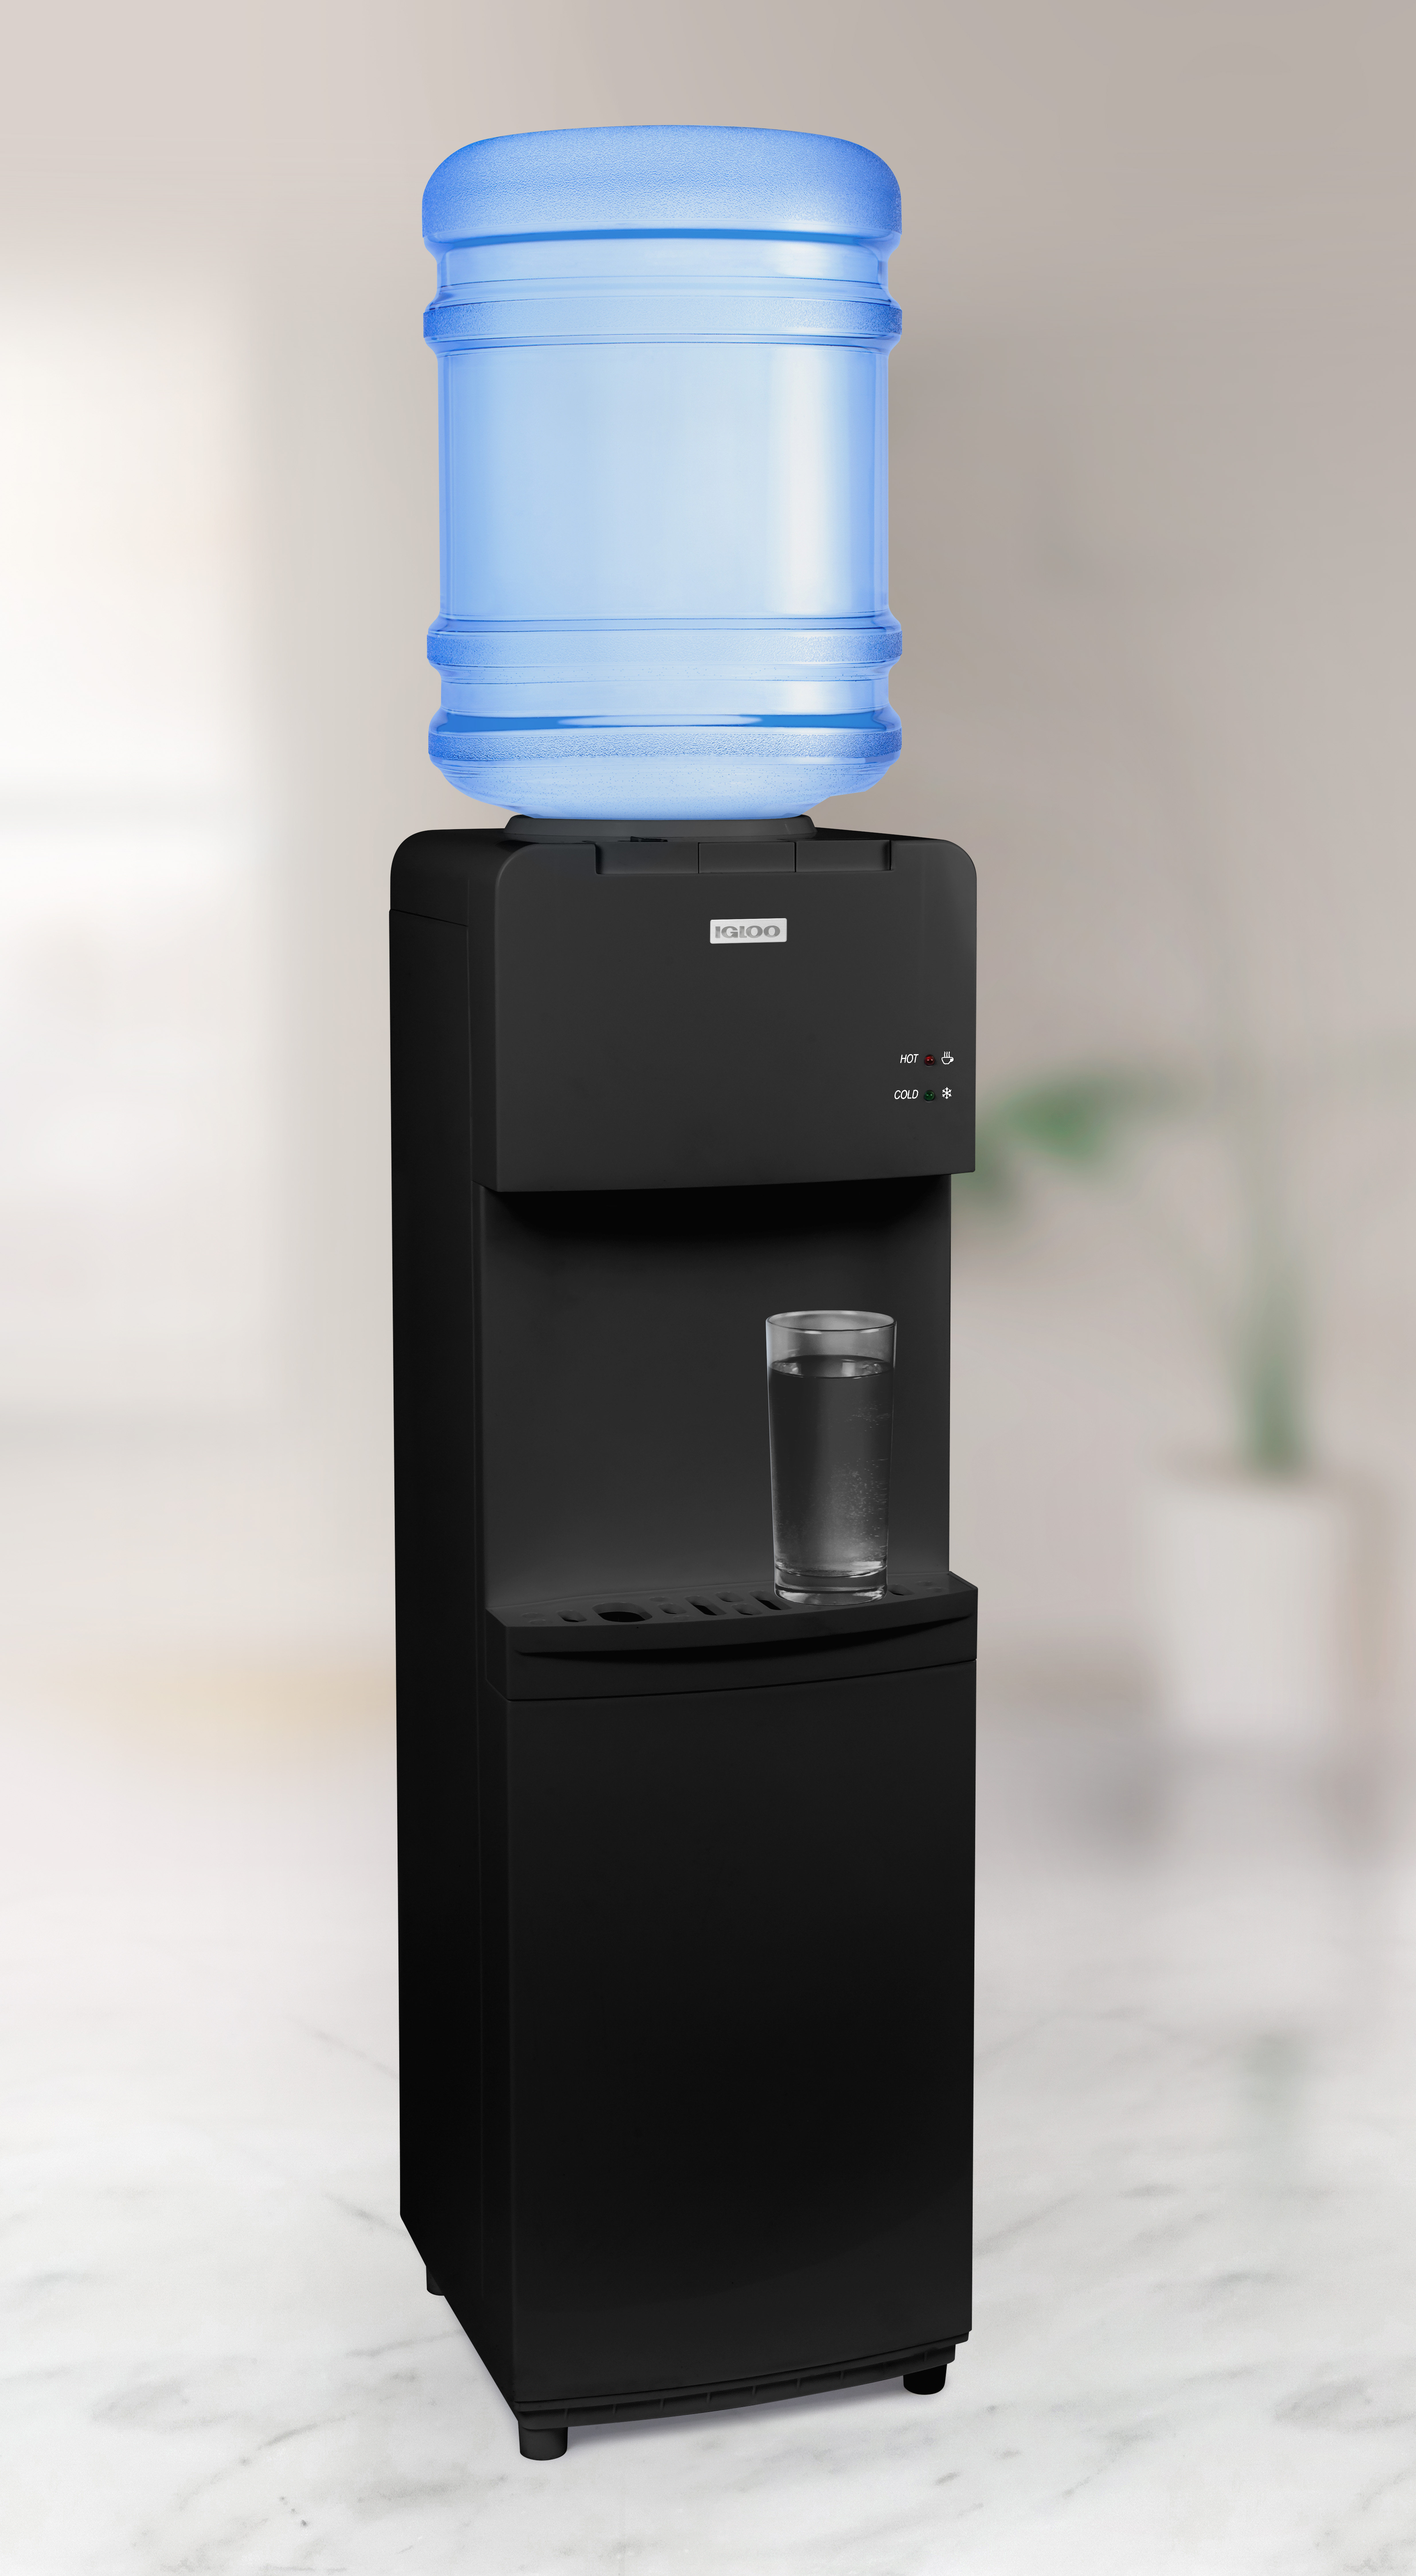 SHIOUCY Electric_Hot_Cold_Water_Dispen Top Loading Water Cooler